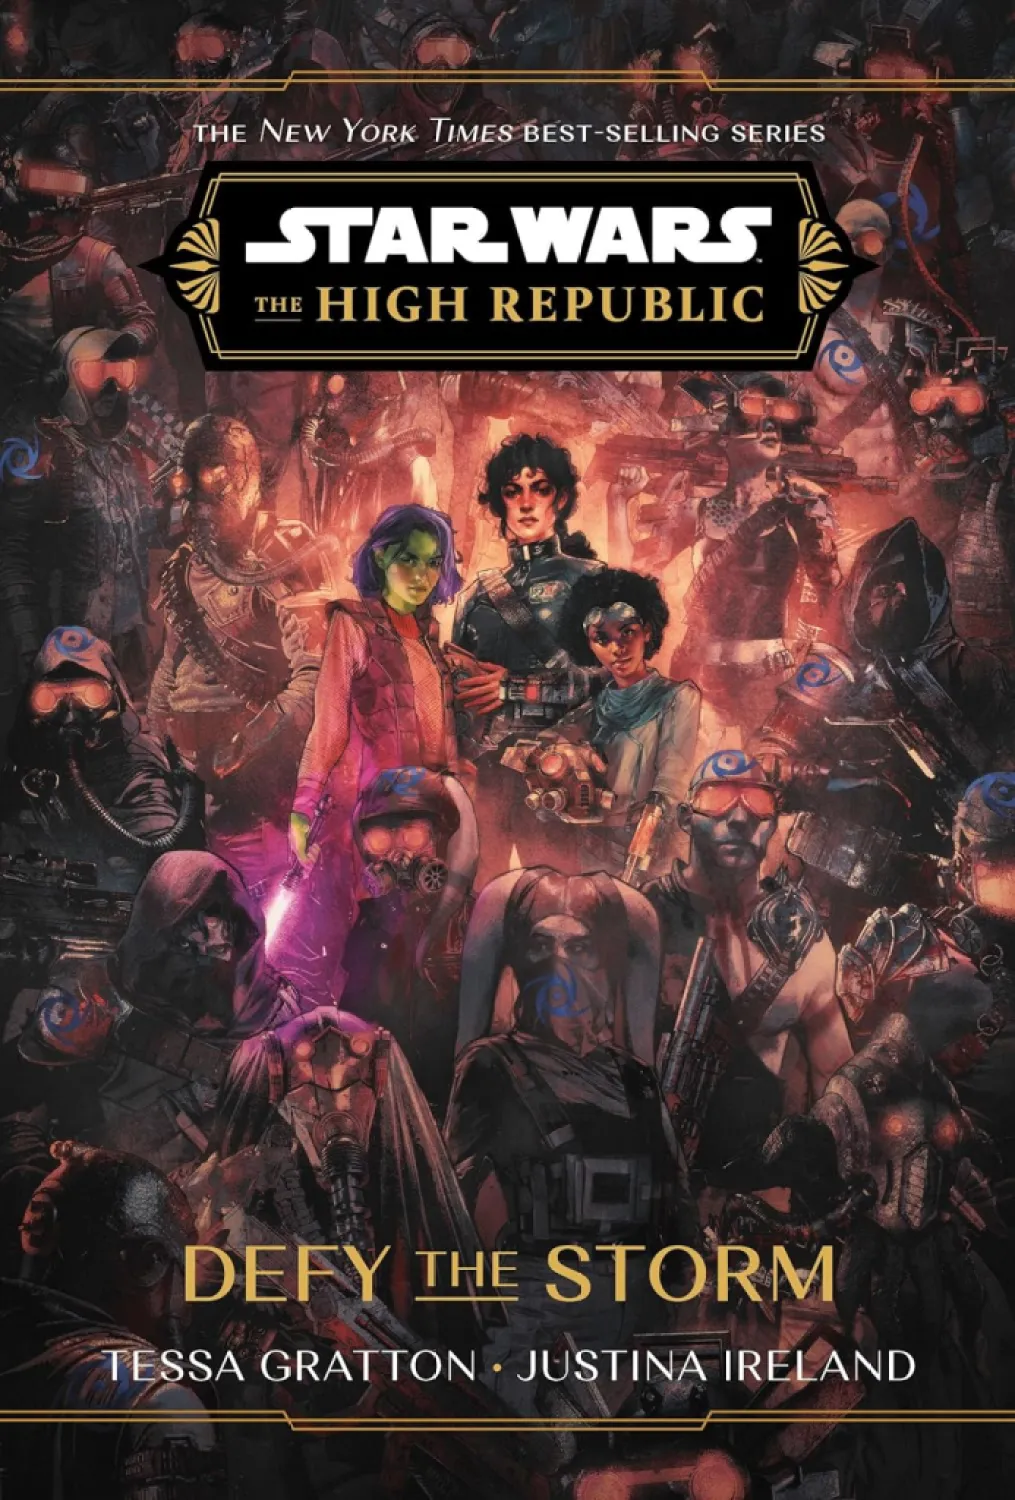 The Defy the Storm cover. This image is part of an article about the reading order for all of the Star Wars: The High Republic books. 